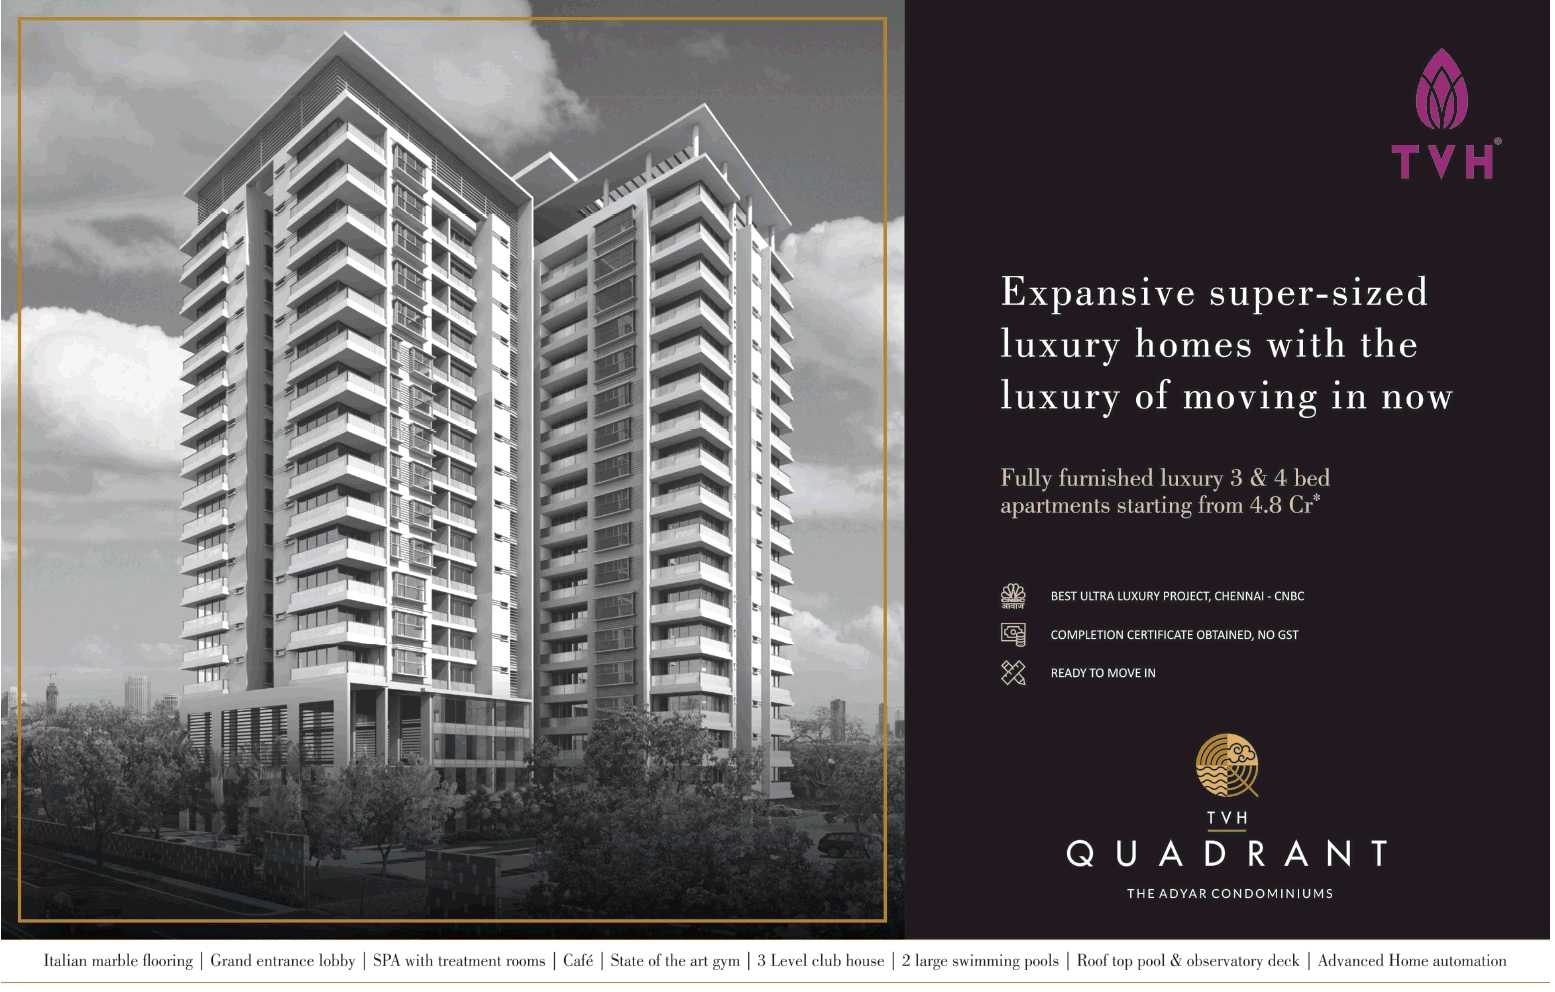 Book fully furnished luxury 3 & 4 bhk apartments at TVH Quadrant in Chennai Update